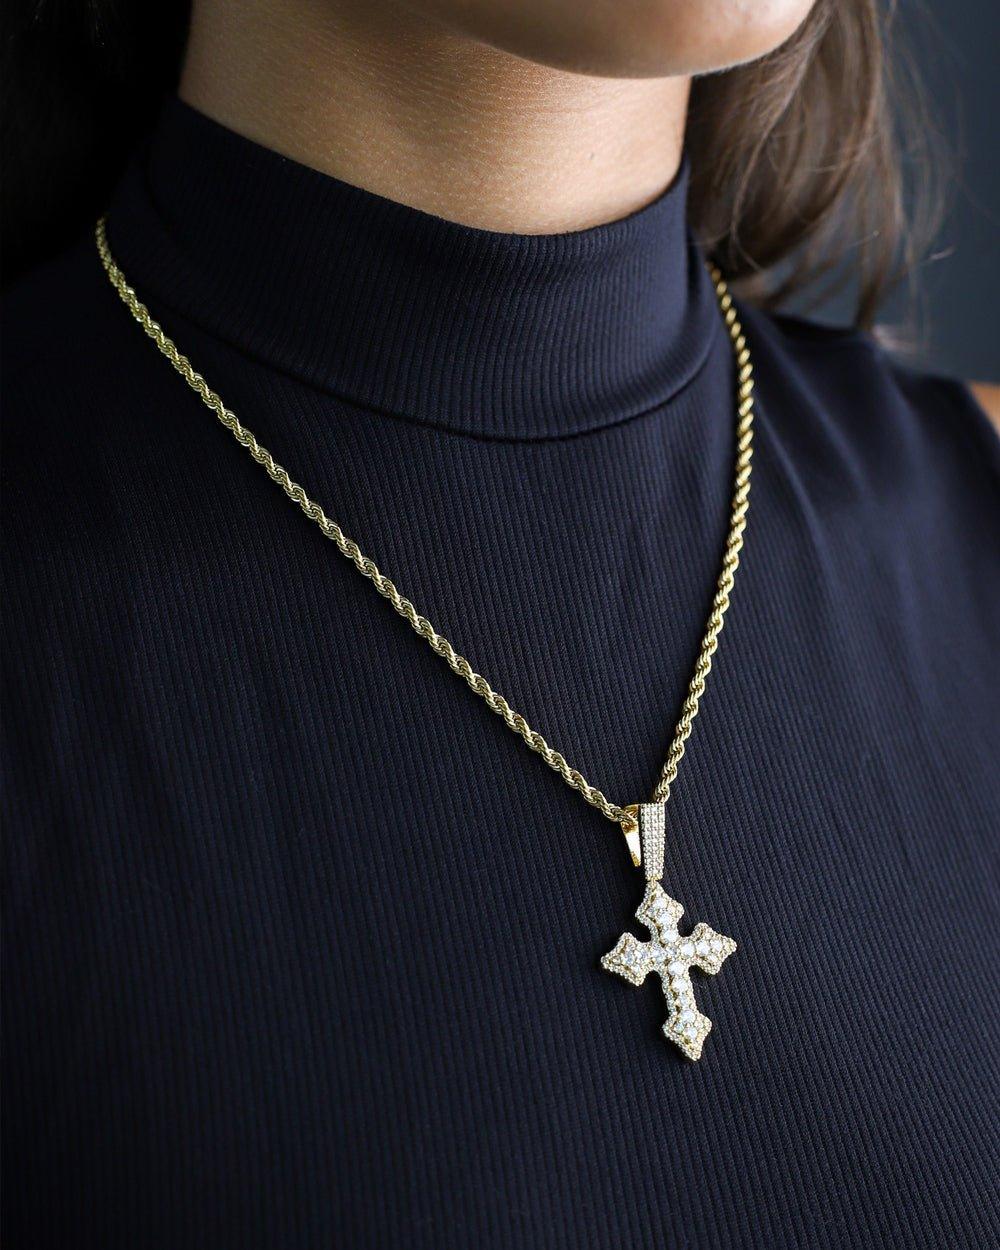 ICED BUDDED CROSS PENDANT. - 18K GOLD - DRIP IN THE JEWEL